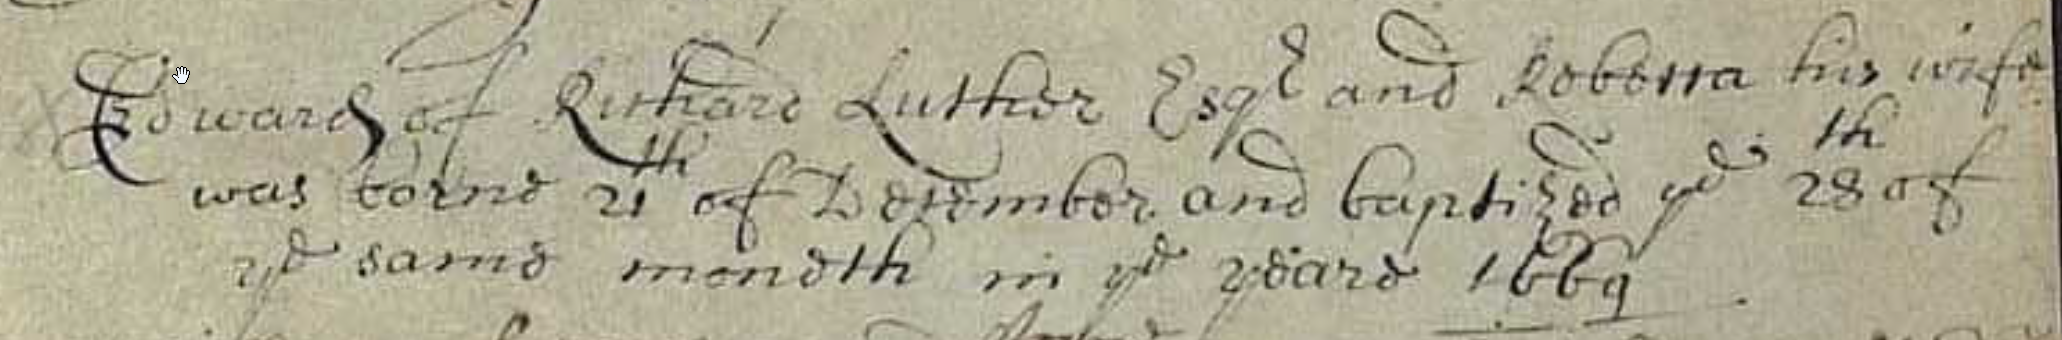 Figure 1: Baptism Record for Edward Luther